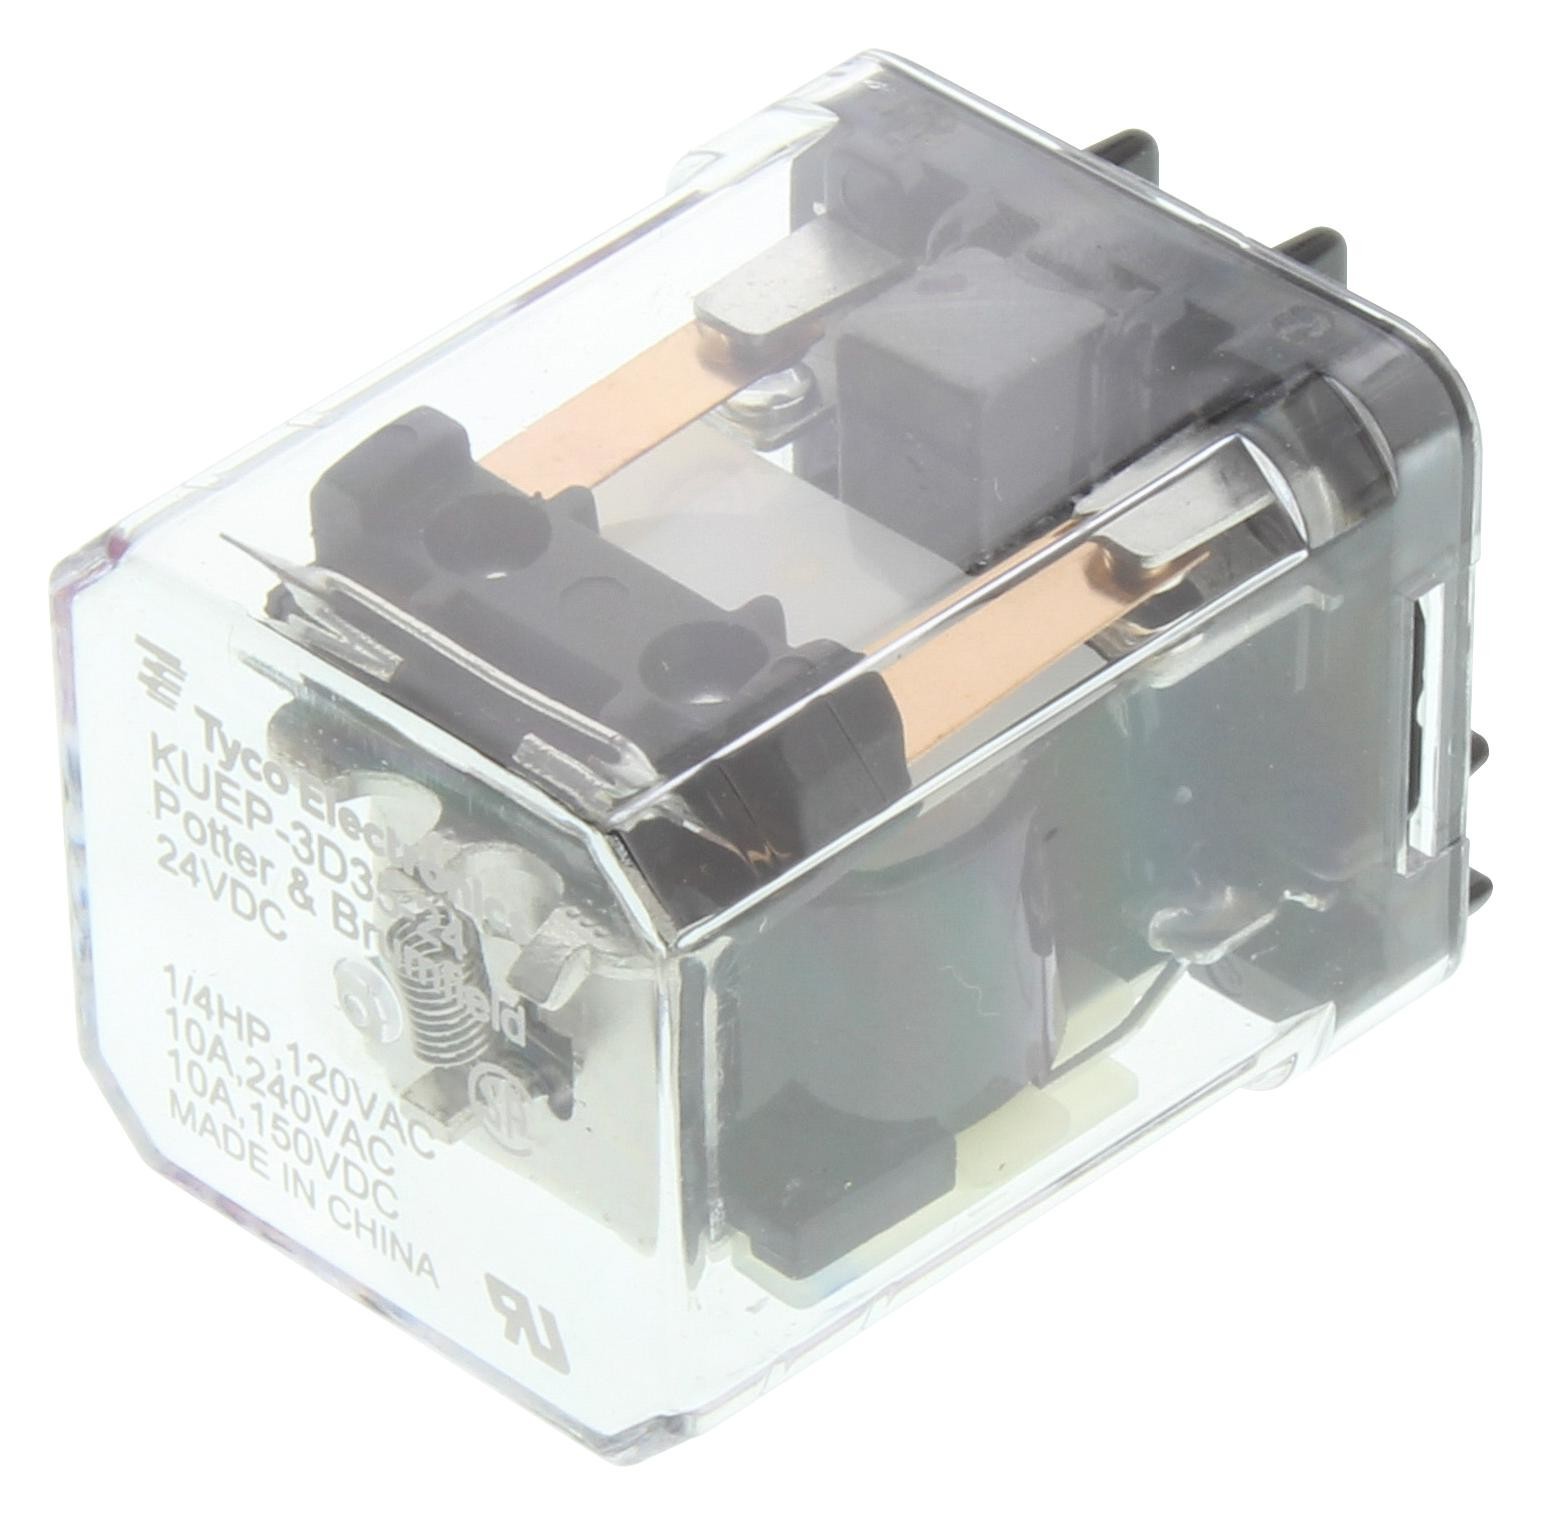 Potter & Brumfield Relays / Te Connectivity Kuep-3D15-48 Power Relay, Spst-No, 48Vdc, 10A, Socket